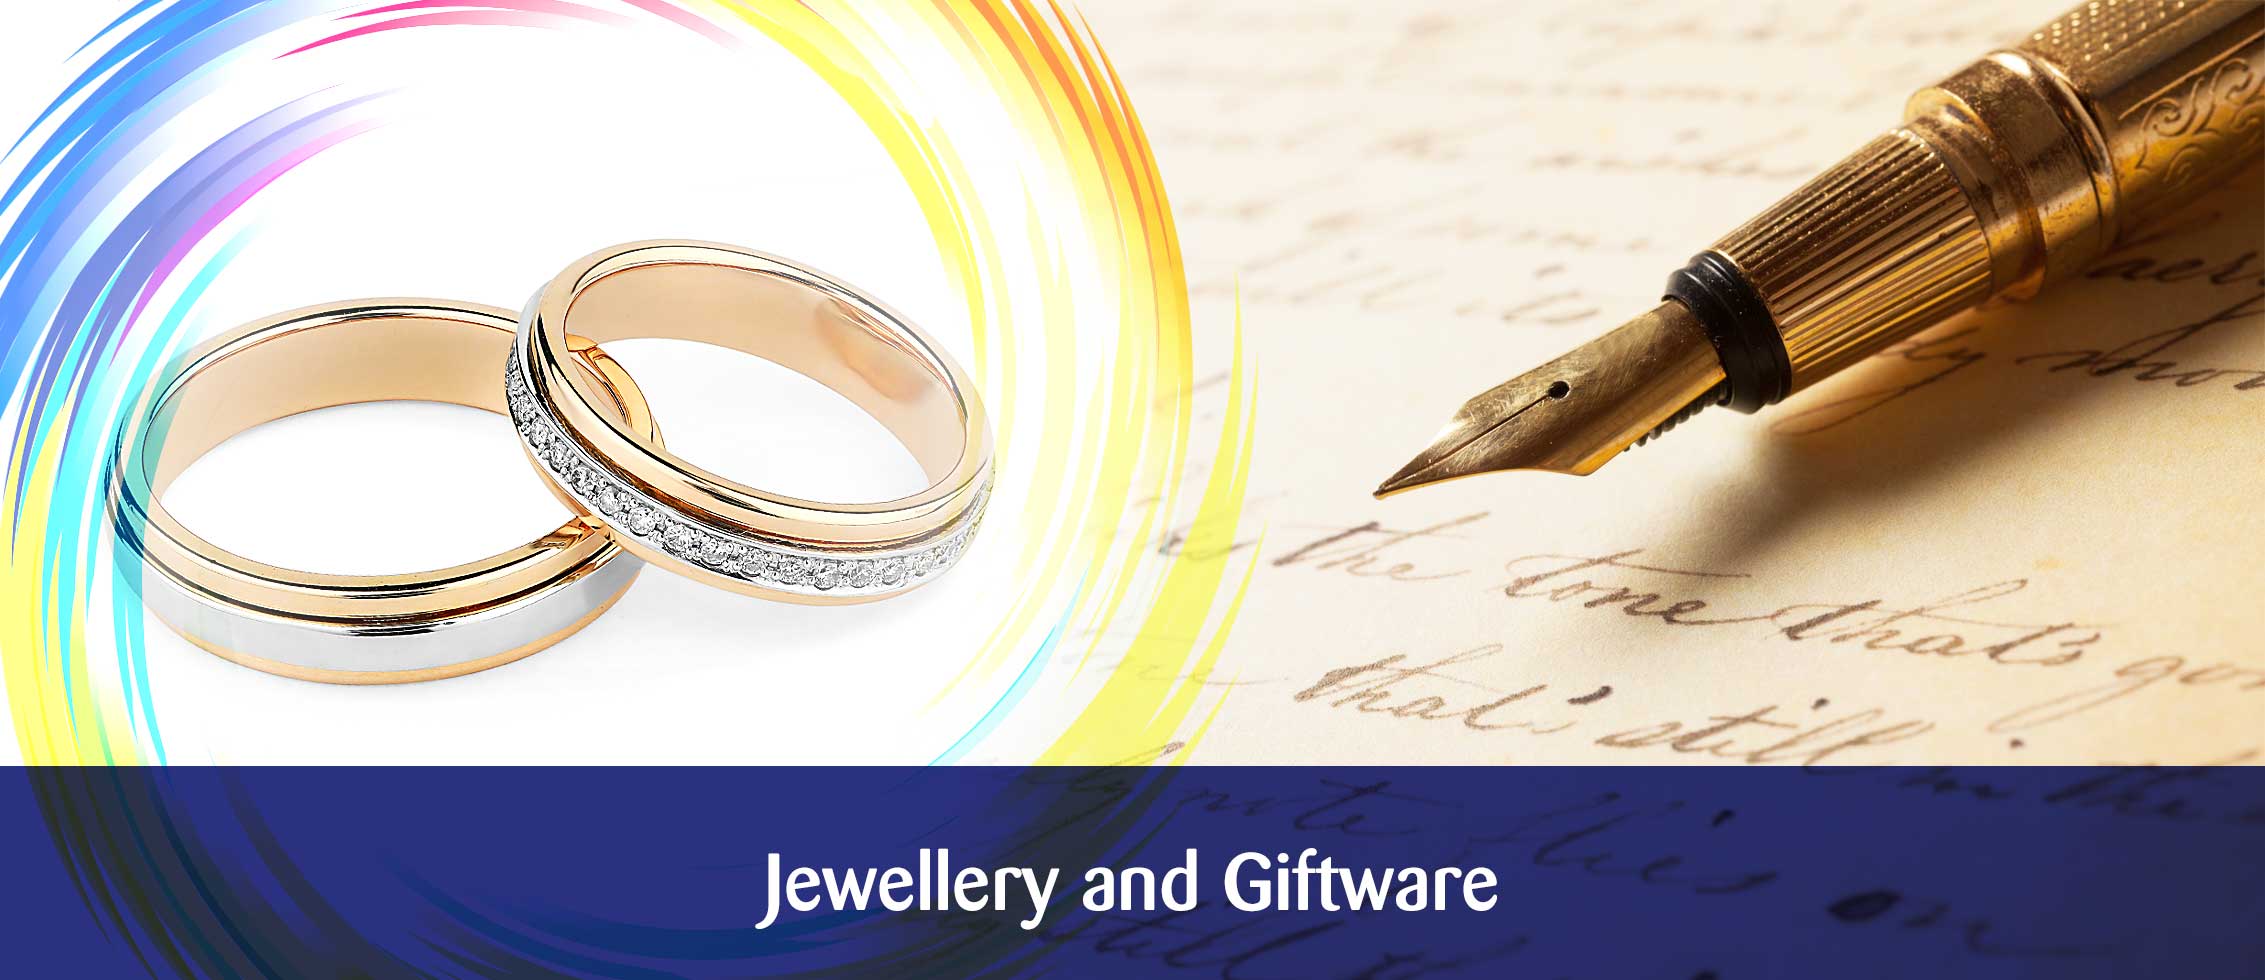 Jewellery and Giftware